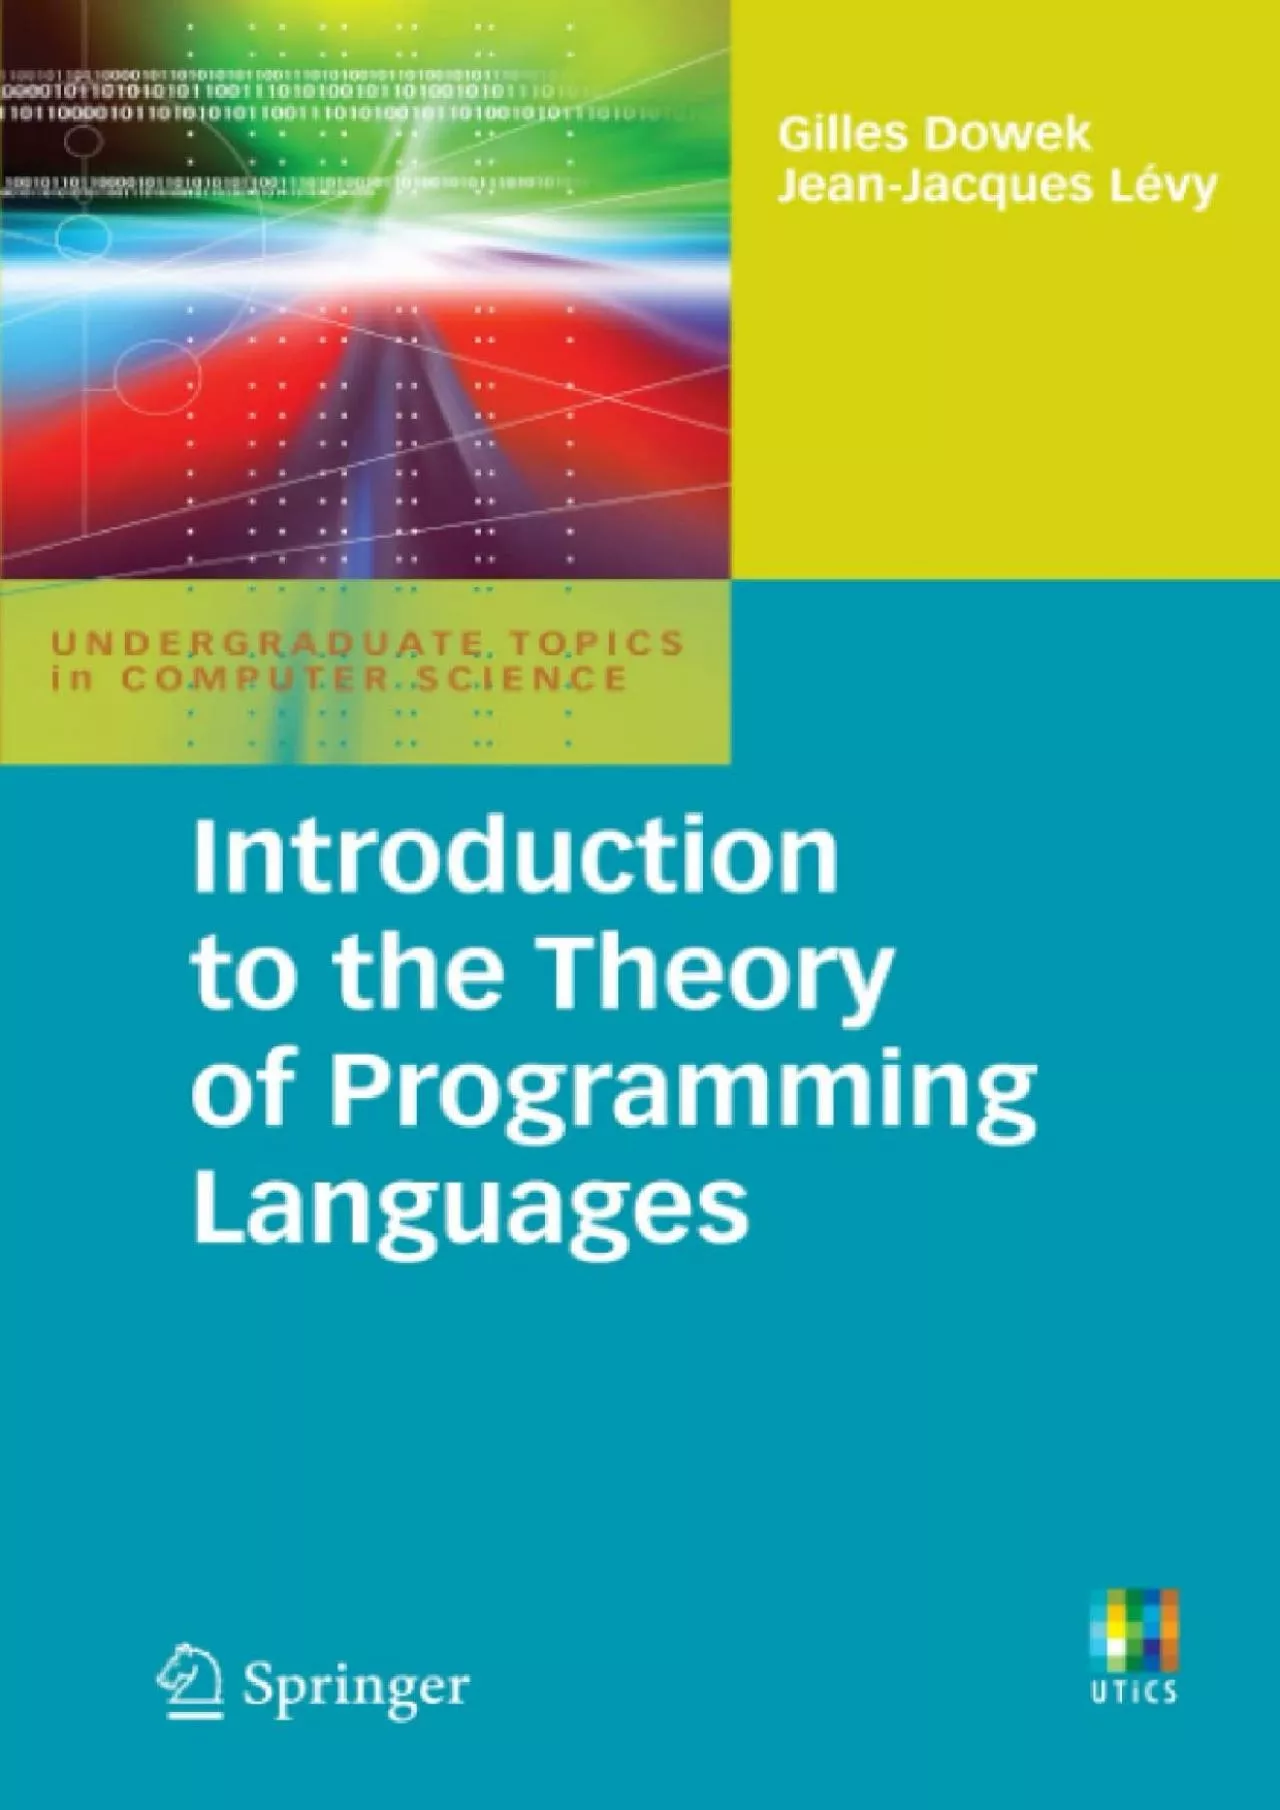 [PDF]-Introduction to the Theory of Programming Languages (Undergraduate Topics in Computer